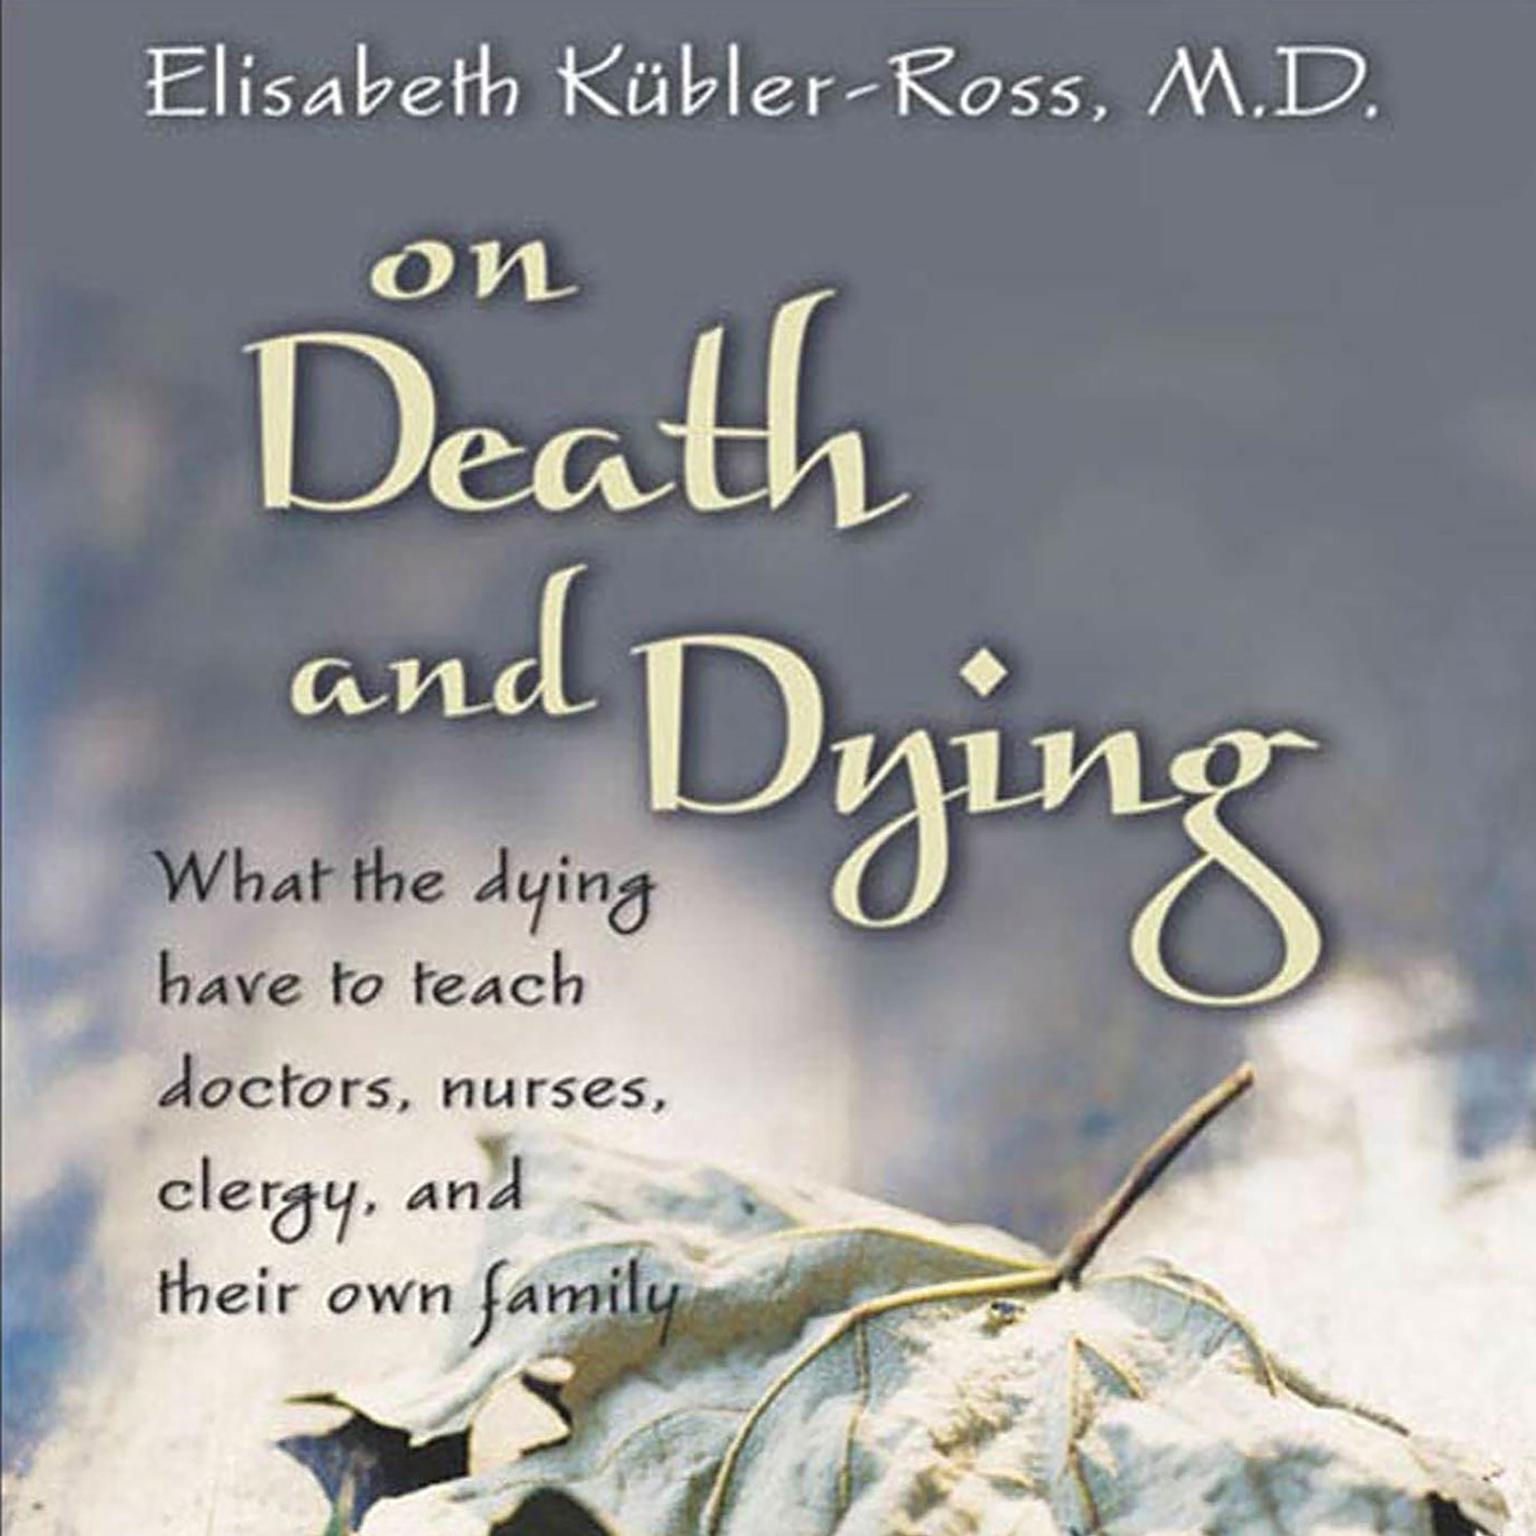 On Death and Dying (Abridged): What the Dying Have to Teach Doctors, Nurses, Clergy and their Own Families Audiobook, by Elisabeth Kübler-Ross